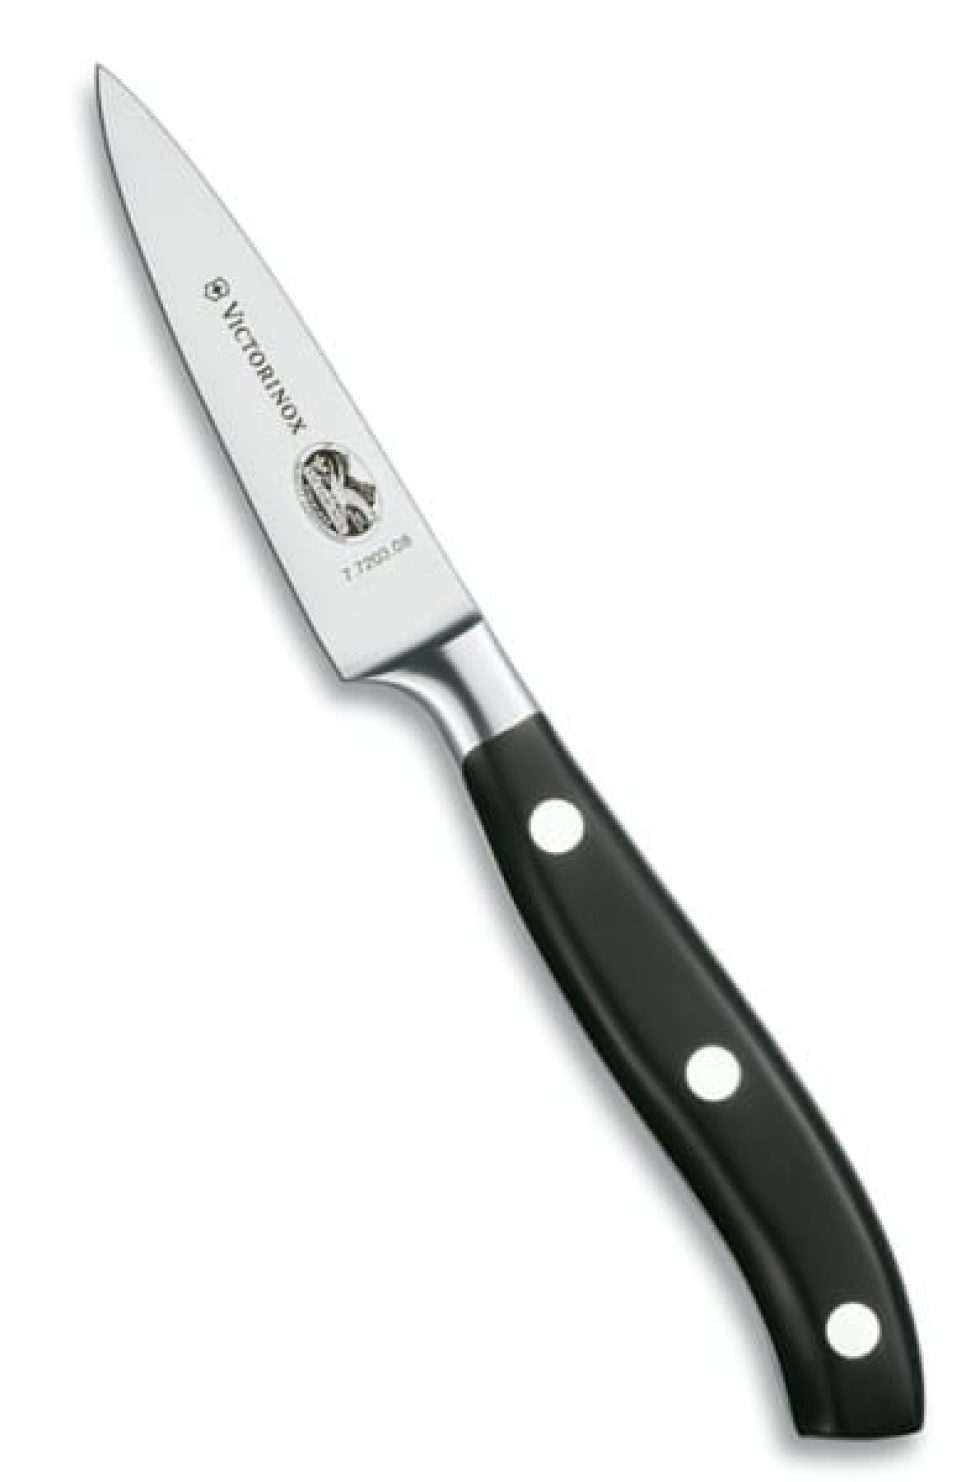 Paring knife, Grand maître, 8 cm - Victorinox in the group Cooking / Kitchen knives / Paring knives at KitchenLab (1095-18028)